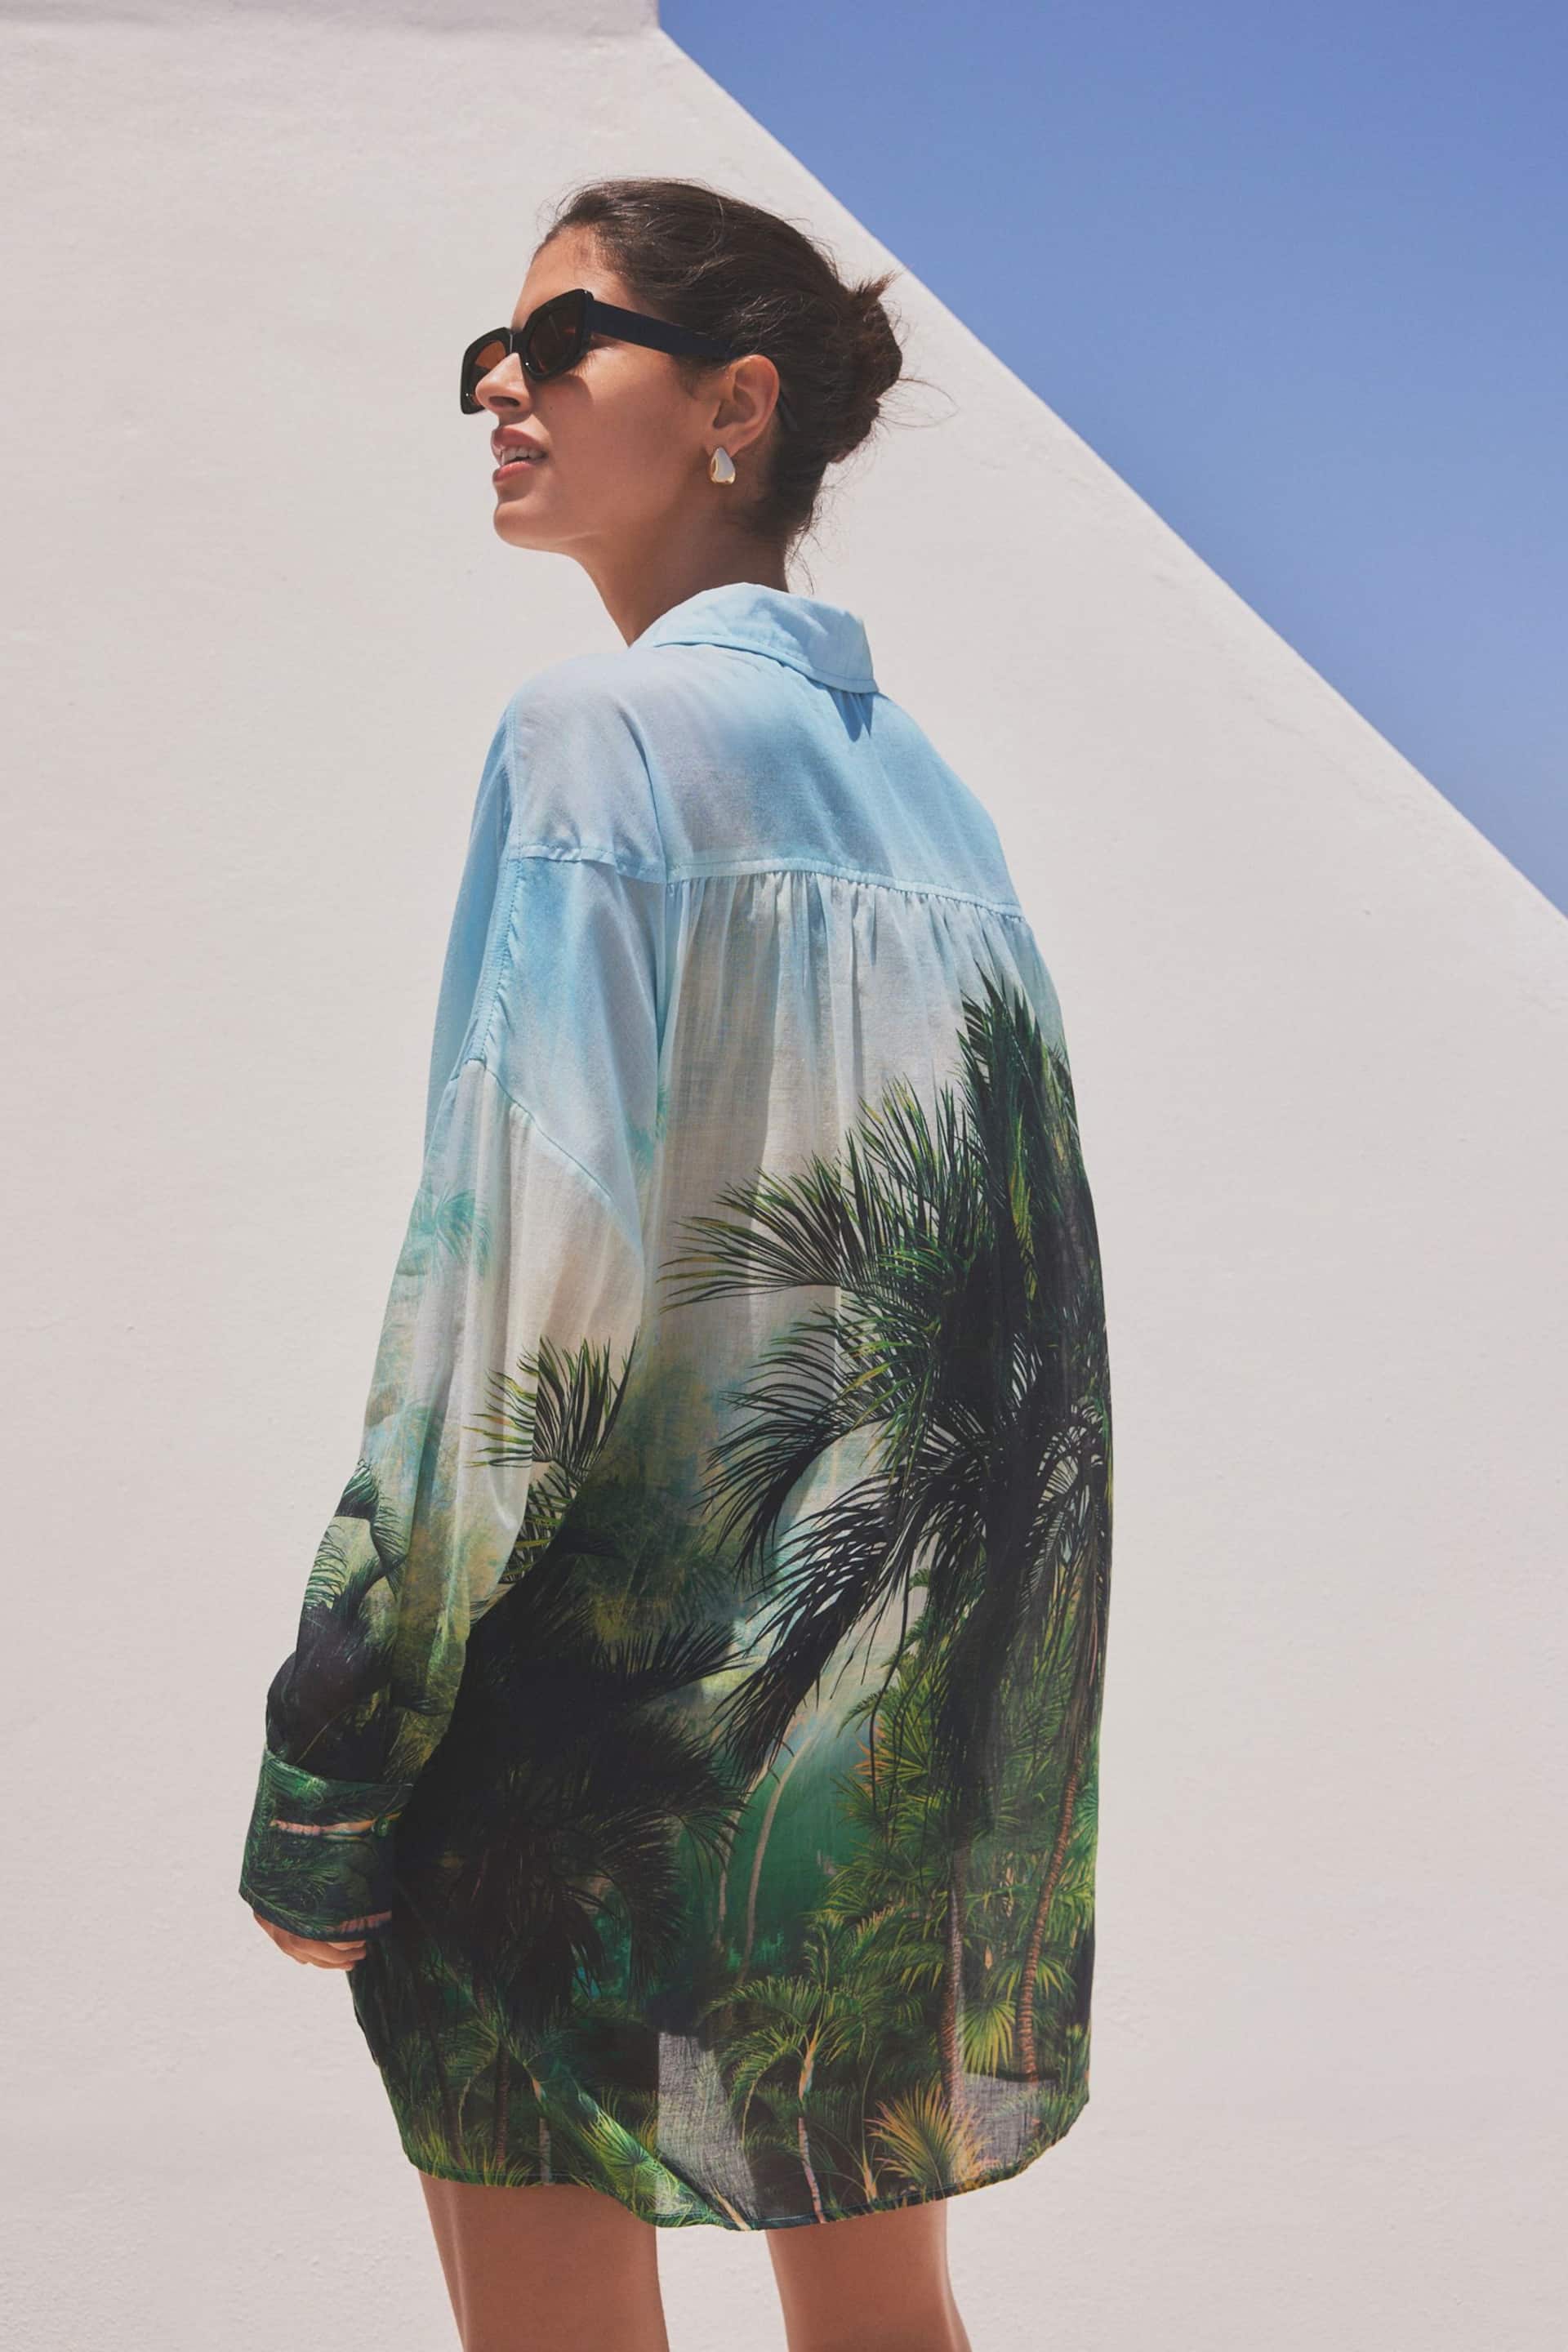 Green/Blue Scene Print Beach Shirt Cover-Up - Image 3 of 8